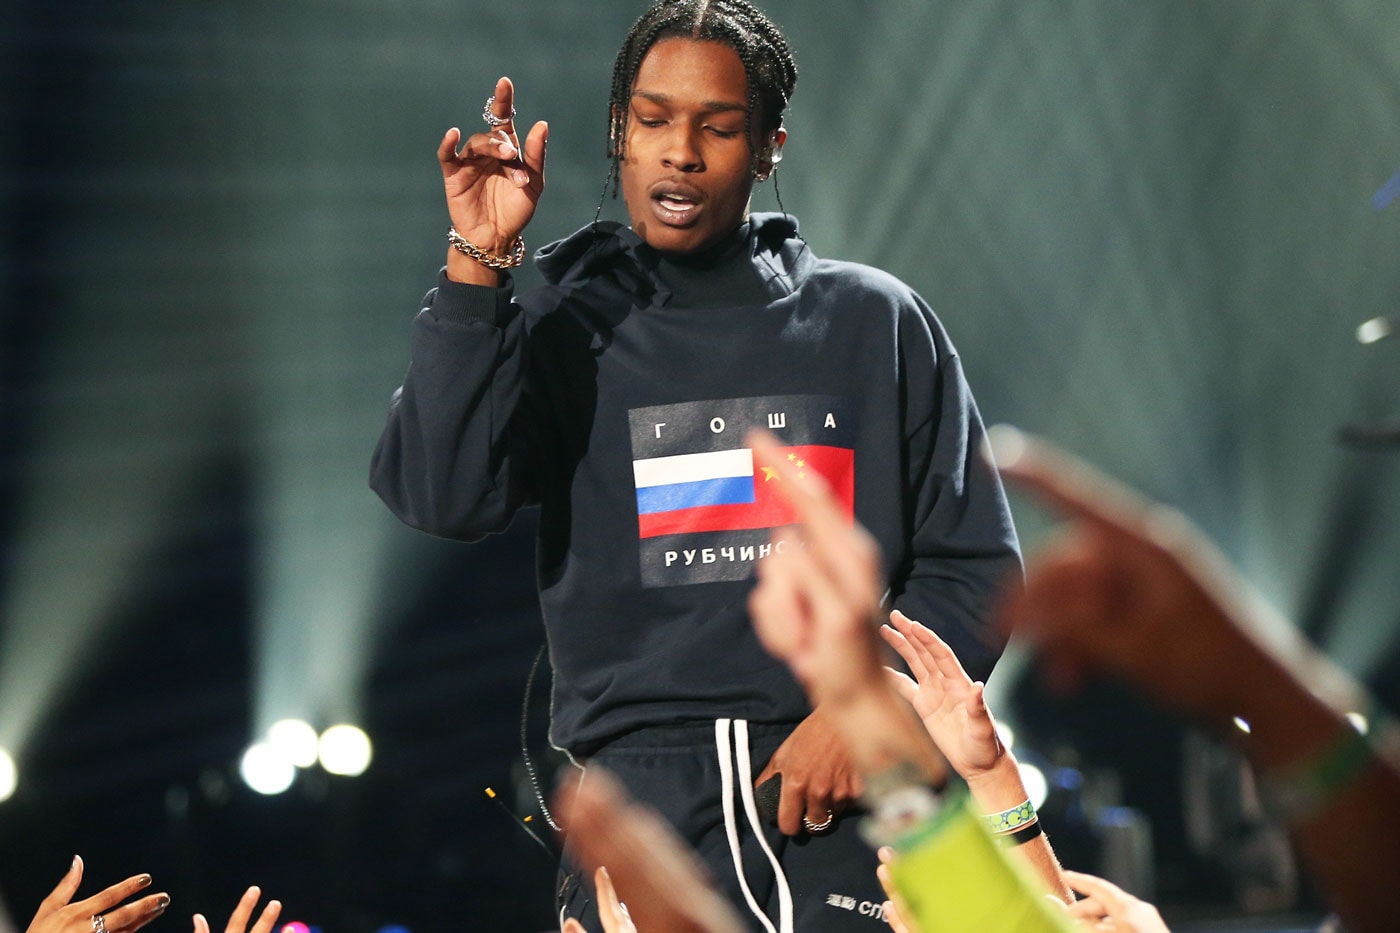 A$AP Rocky Makes "What Are Those?" Joke in New Samsung Commercial